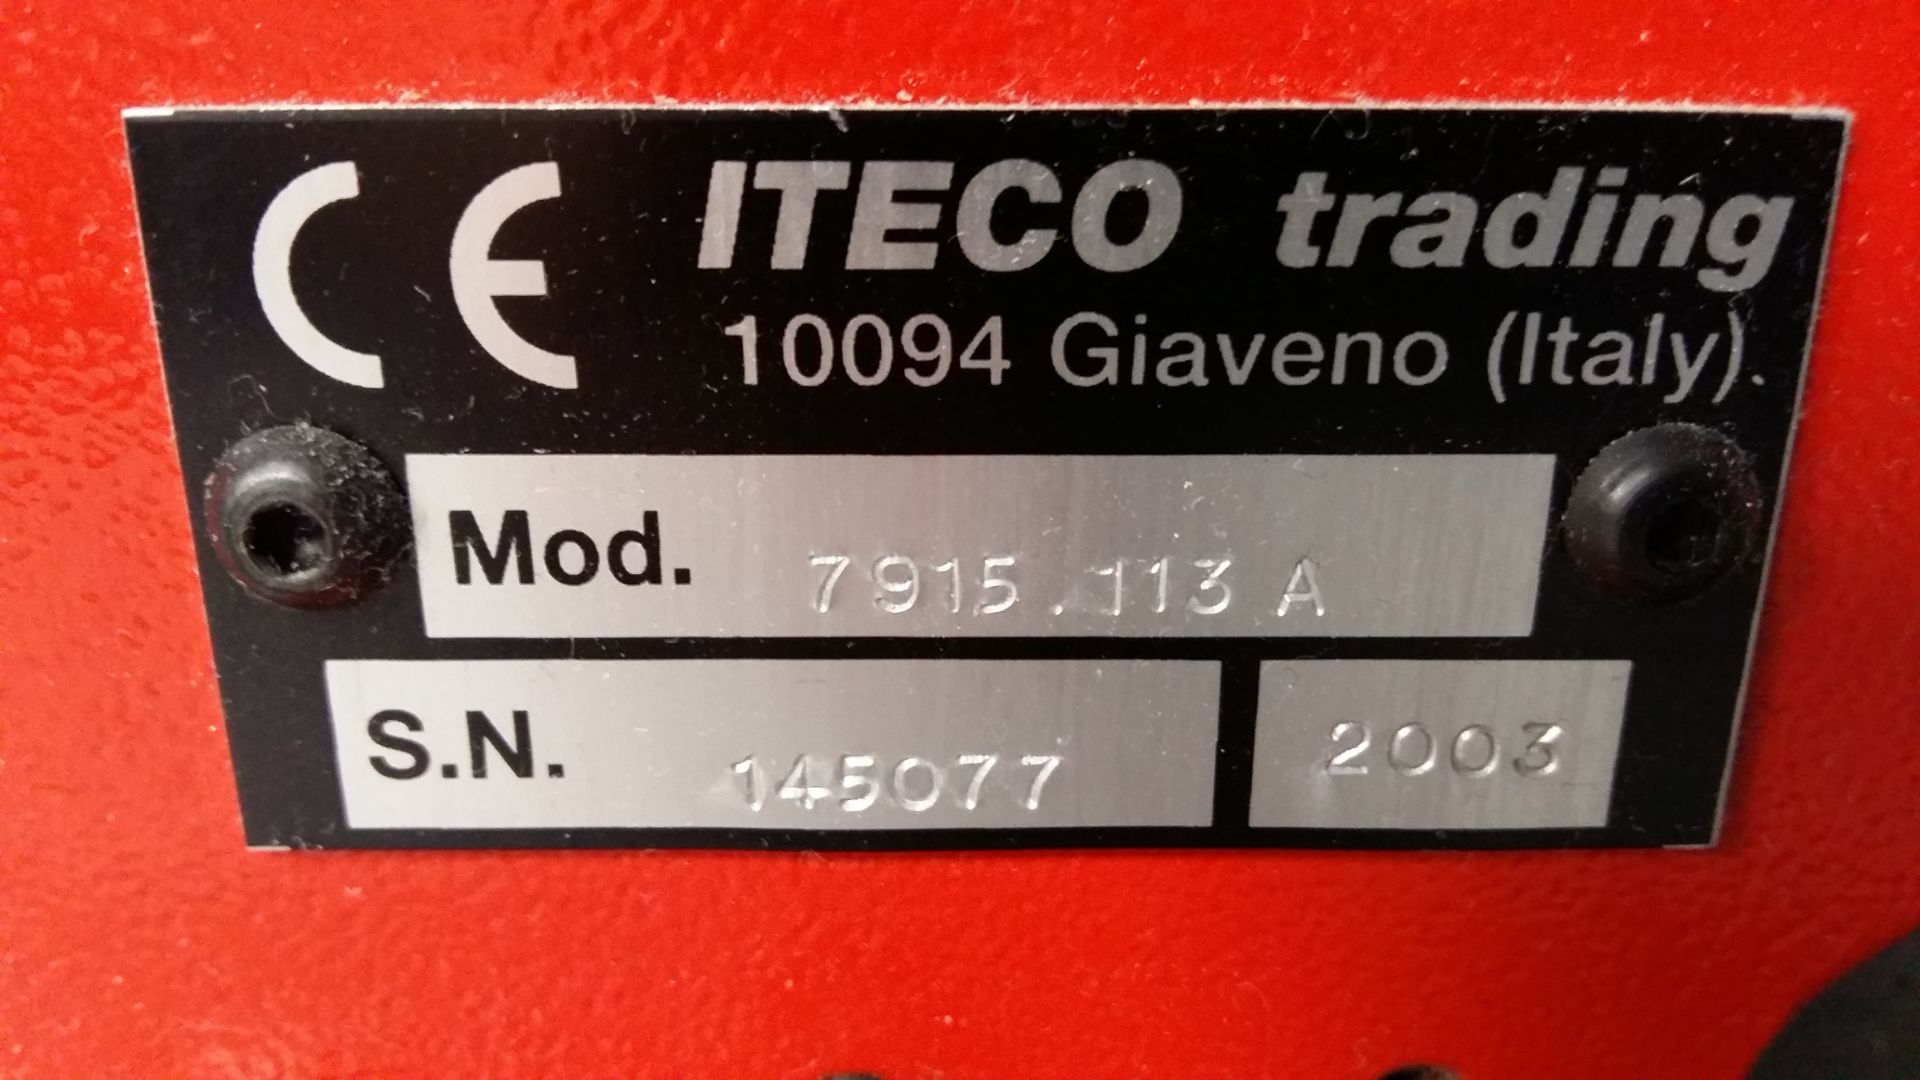 Iteco Trading 7915.113A Superform/R taped radial lead cutter - Image 3 of 4